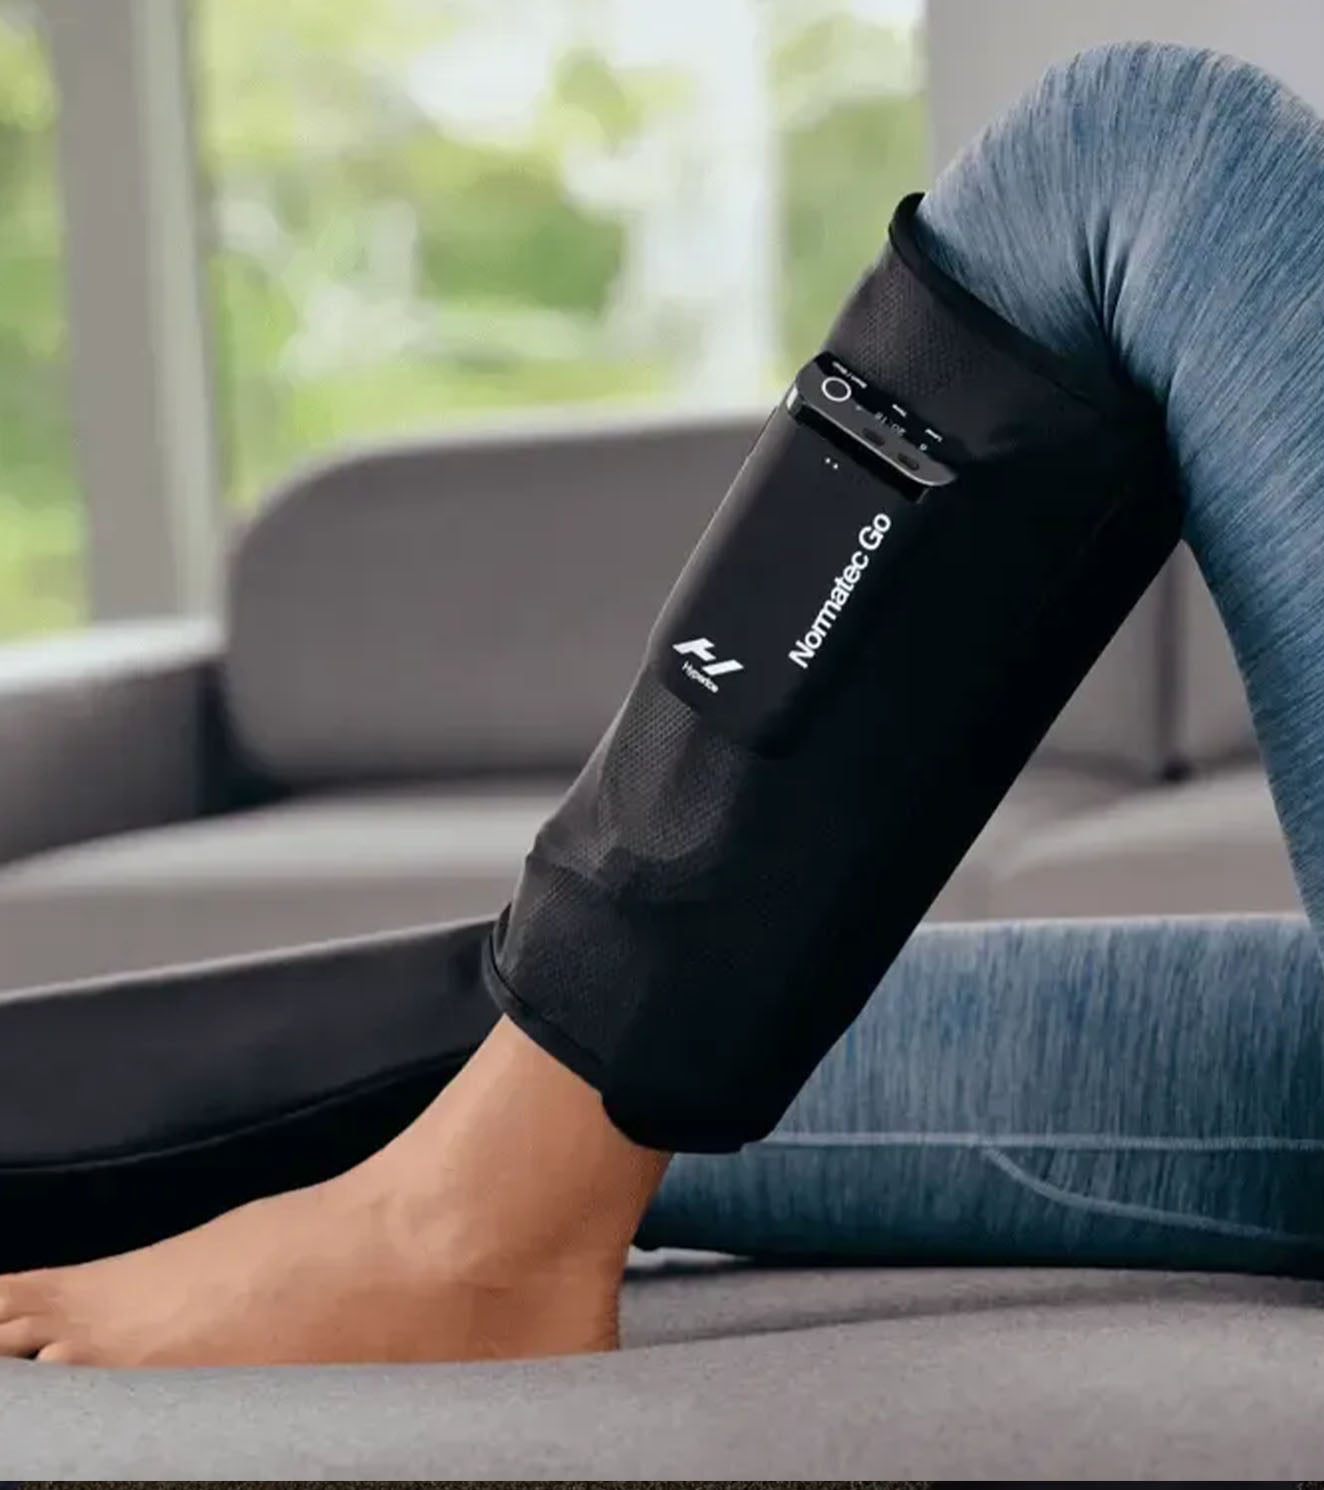 Normatec go - Recovery gear